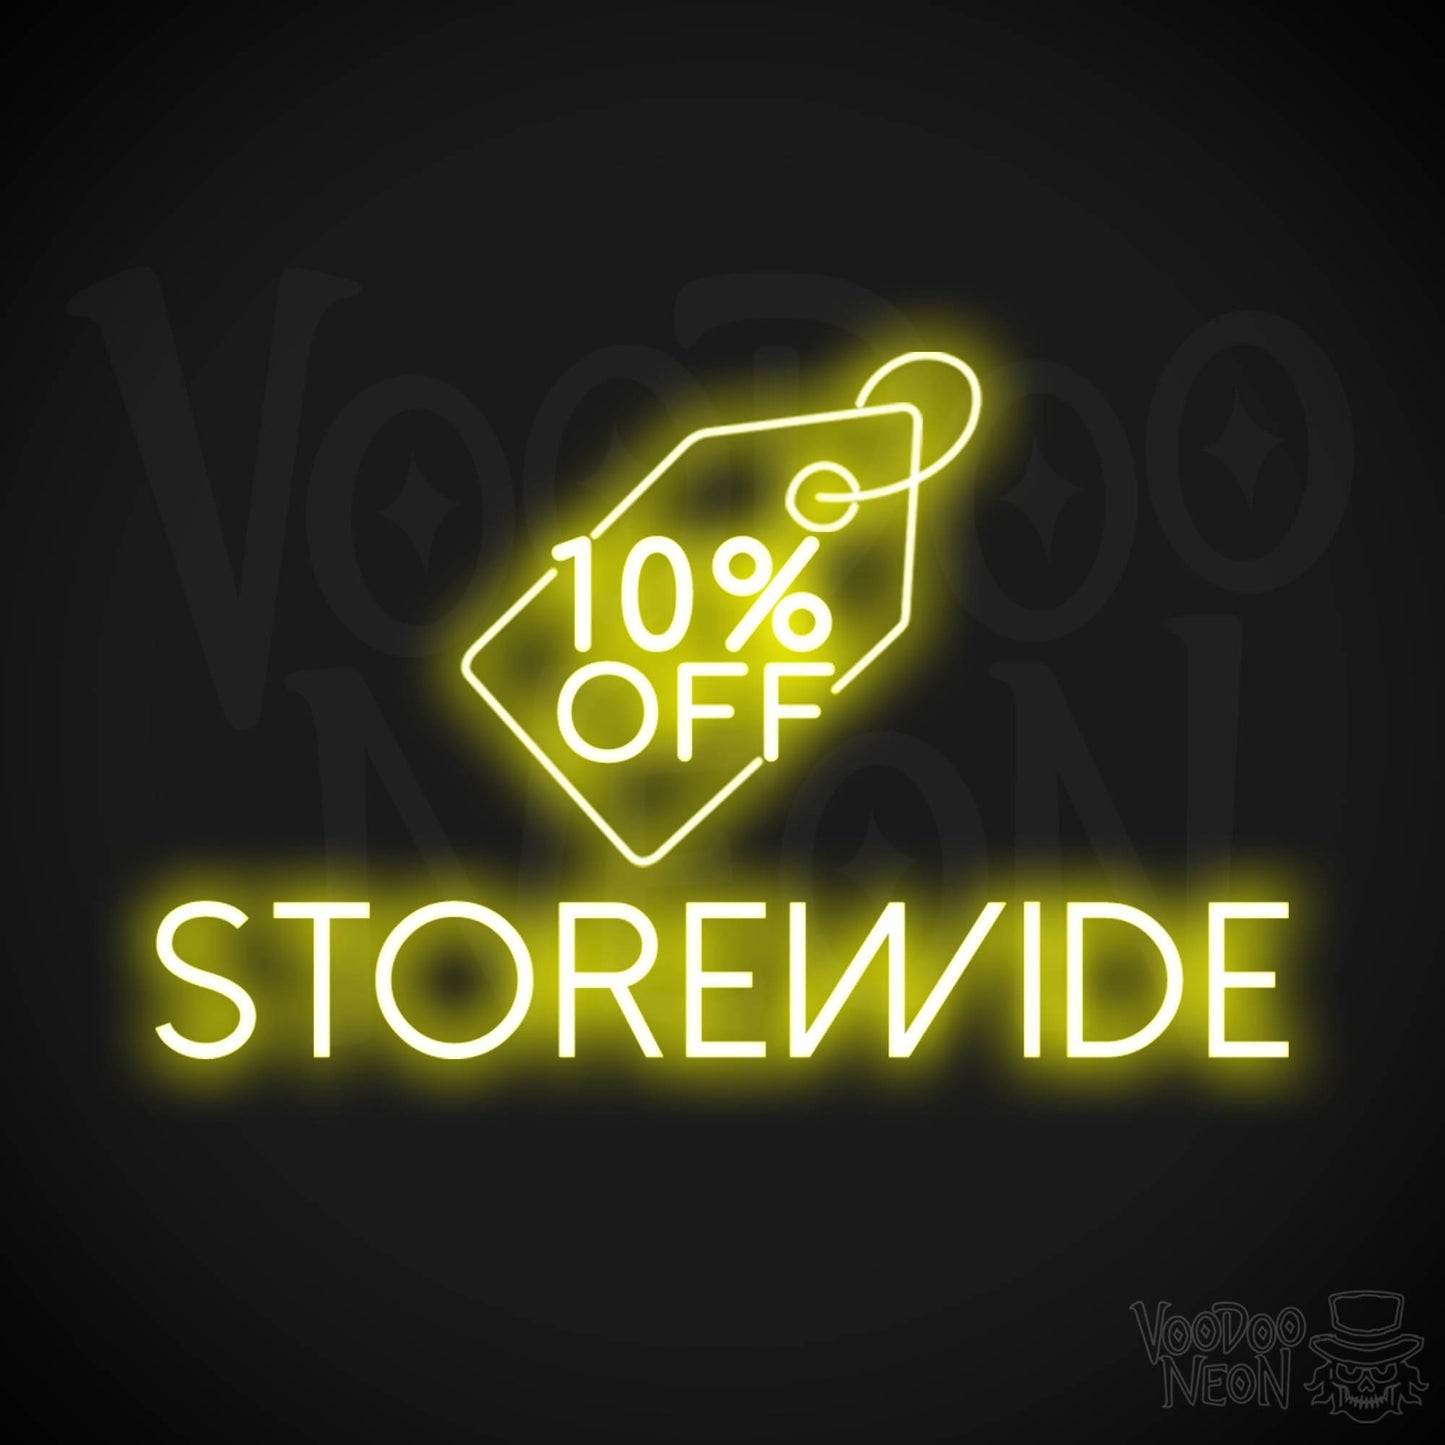 10% Off Storewide Neon Sign - 10% Off Storewide Sign - Neon Shop Signs - Color Yellow